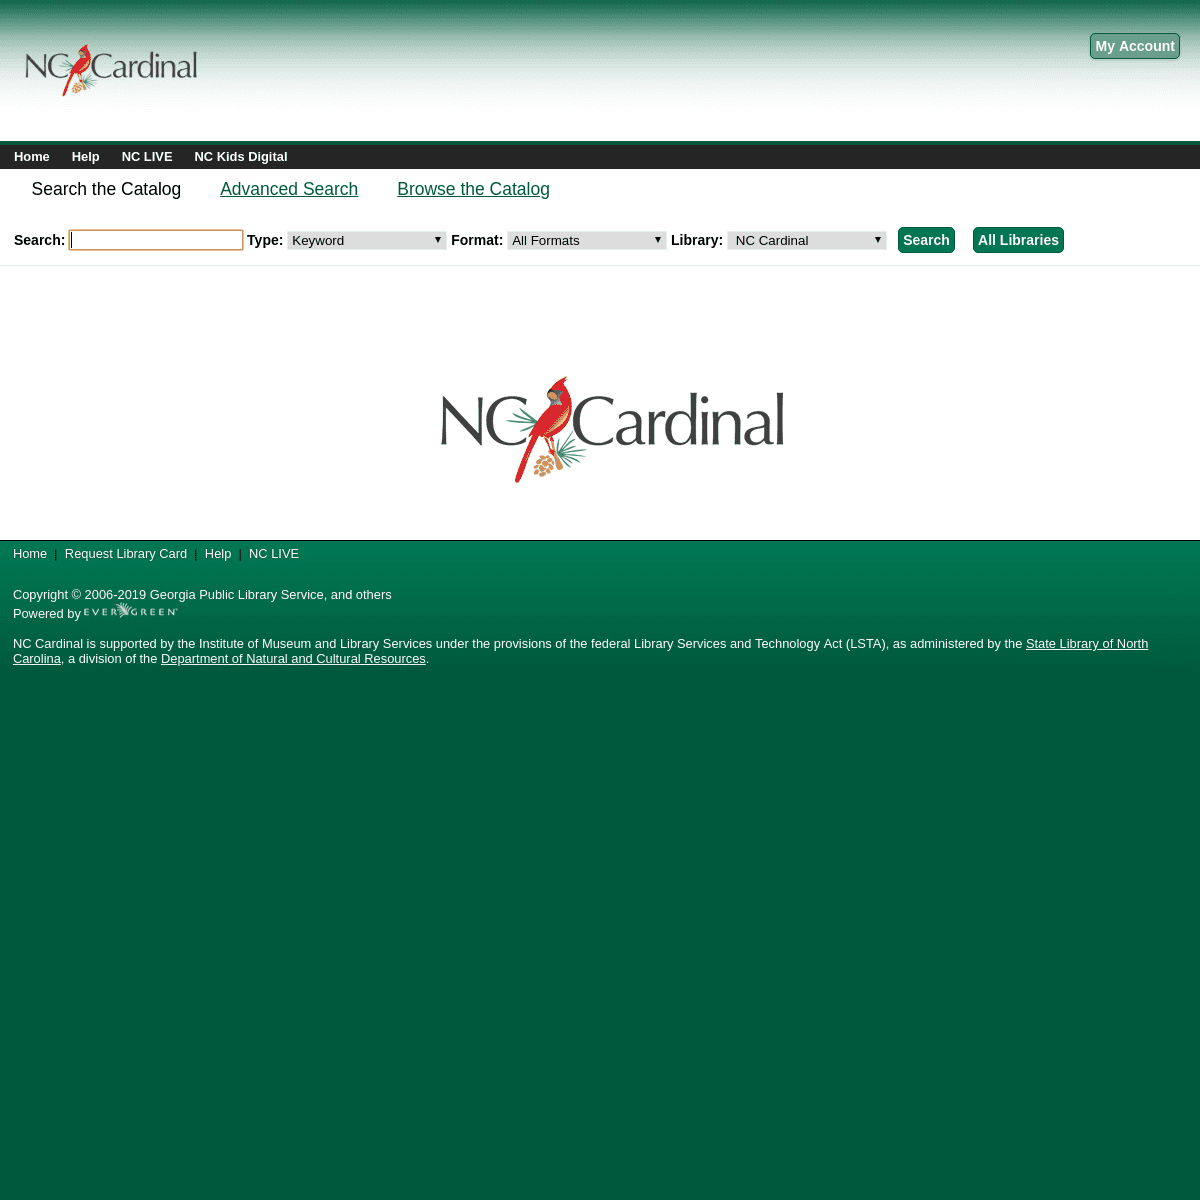 A complete backup of nccardinal.org